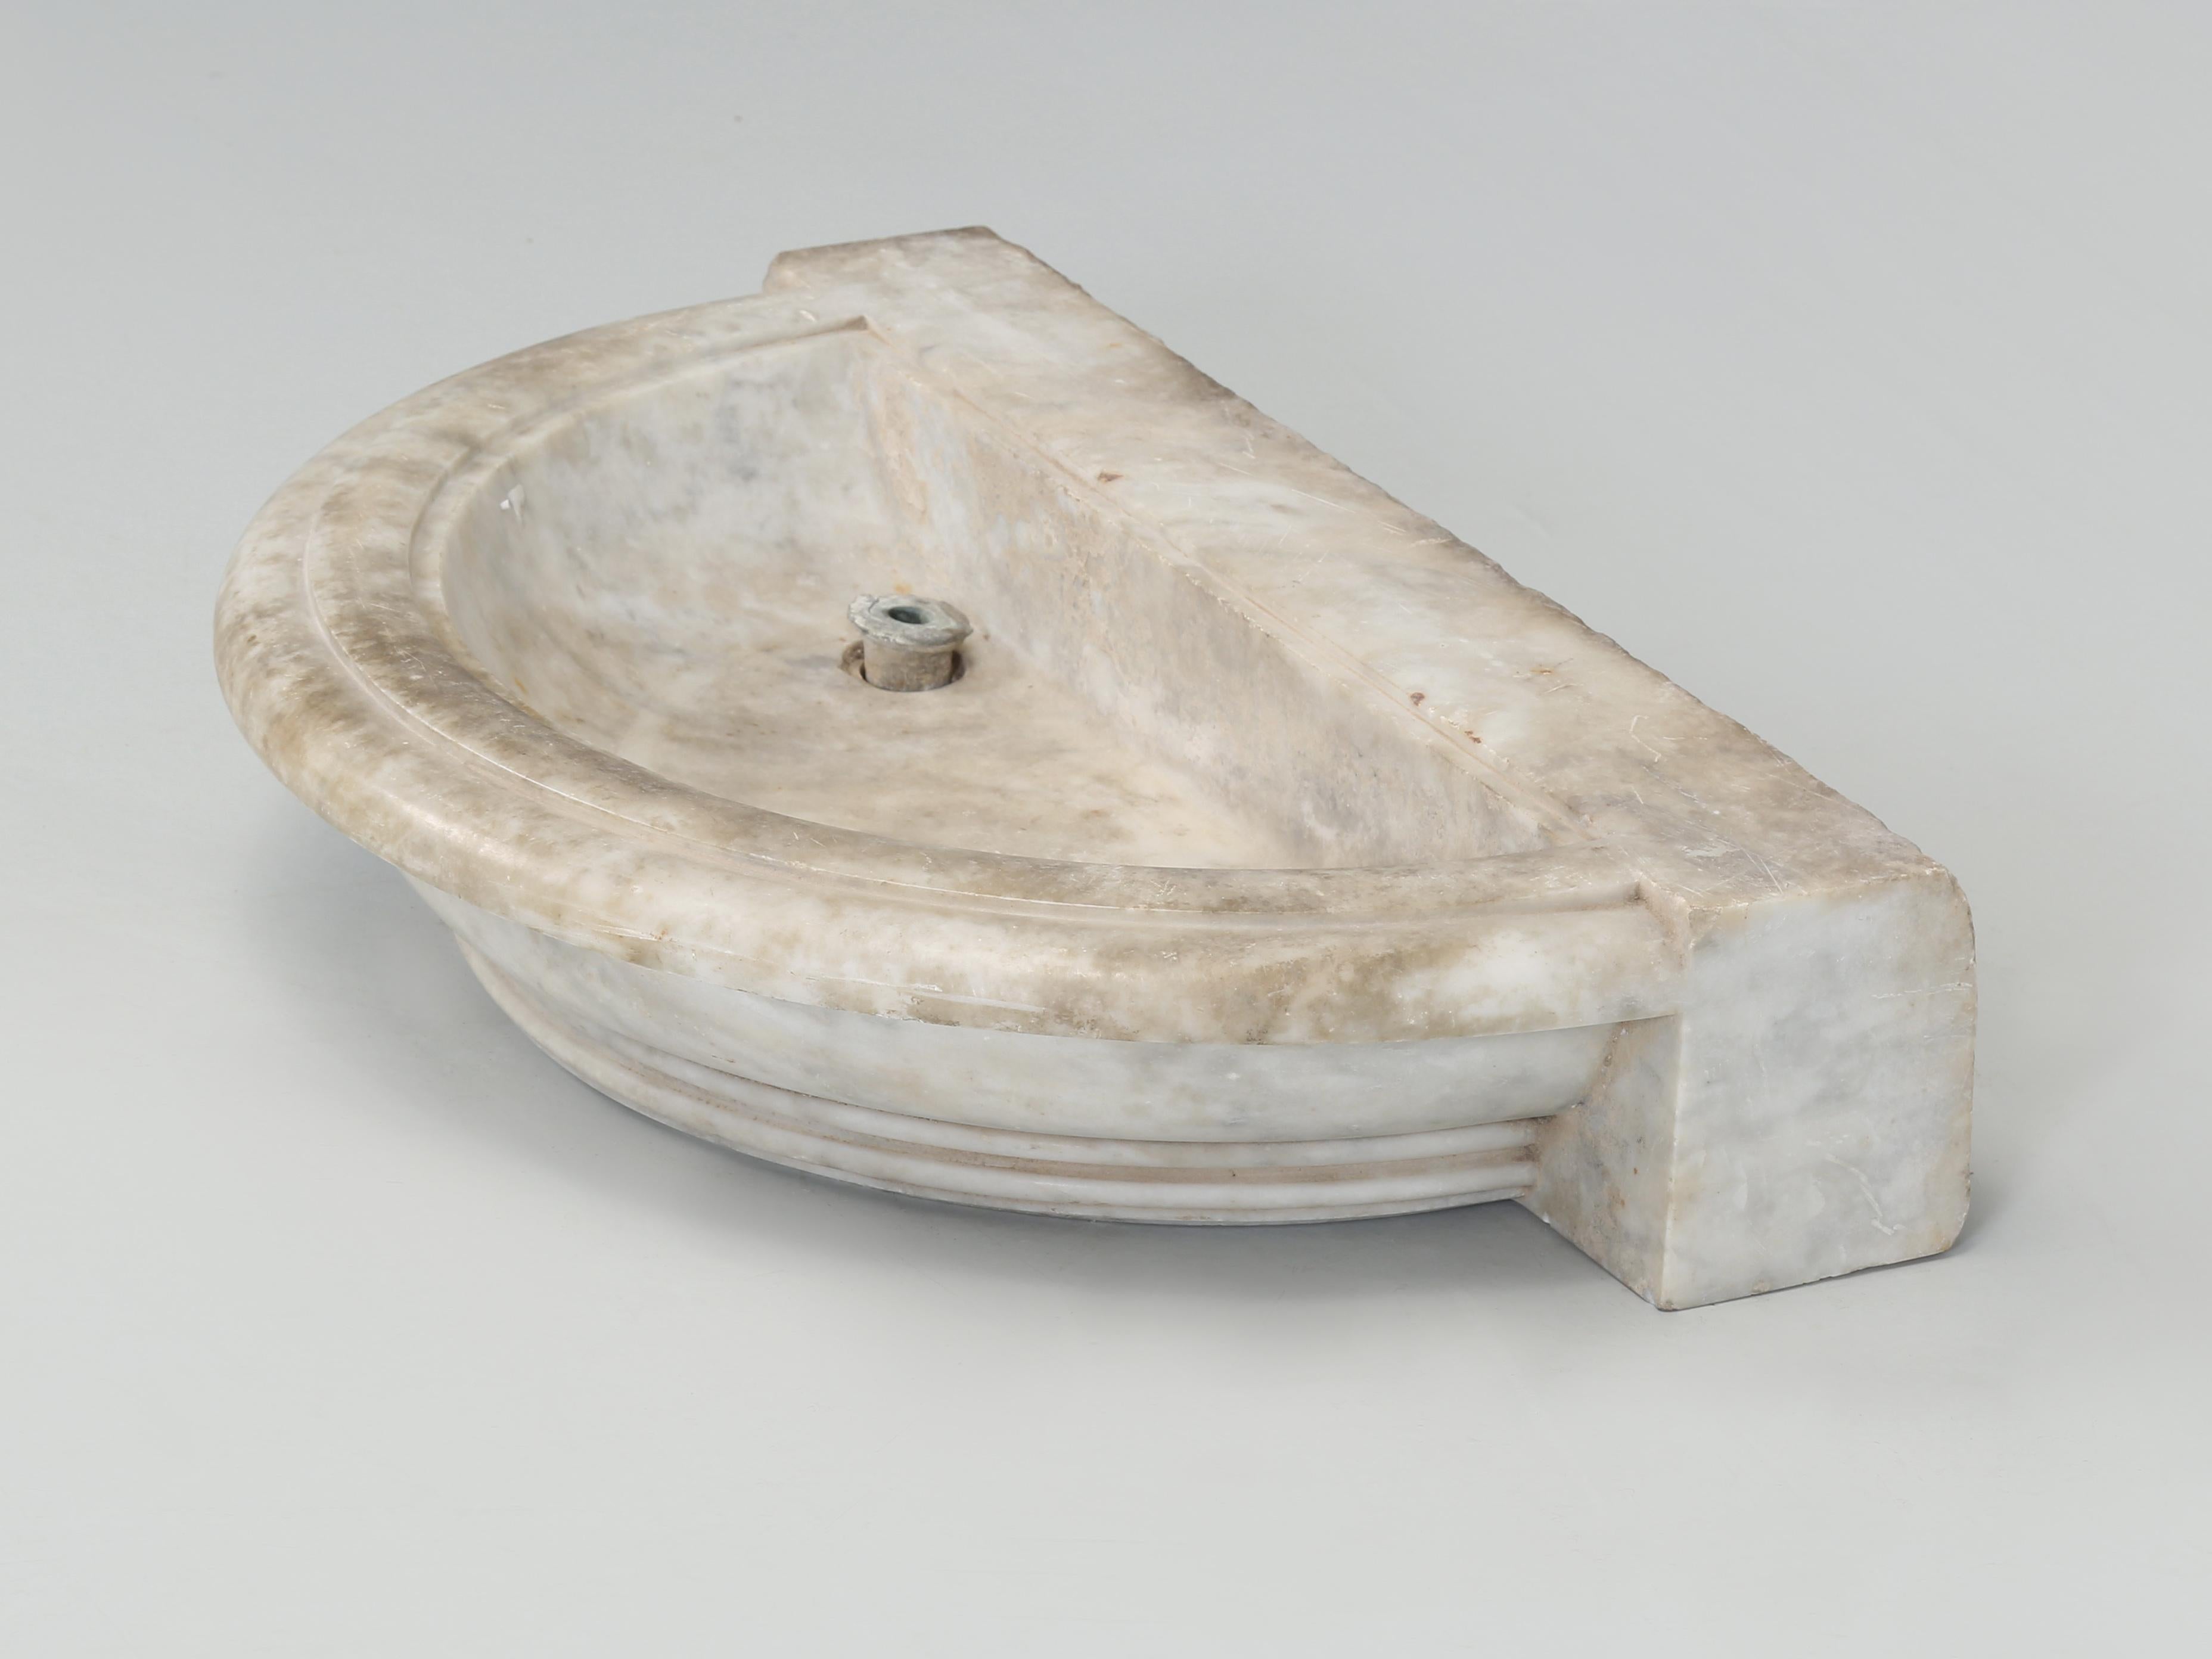 Antique Marble Sink from the Toulouse Region of France. Although we consider ourselves fairly decent at estimating when something was made, to be honest we are at a loss for this one. There is no question that the small Stone (marble) Sink was